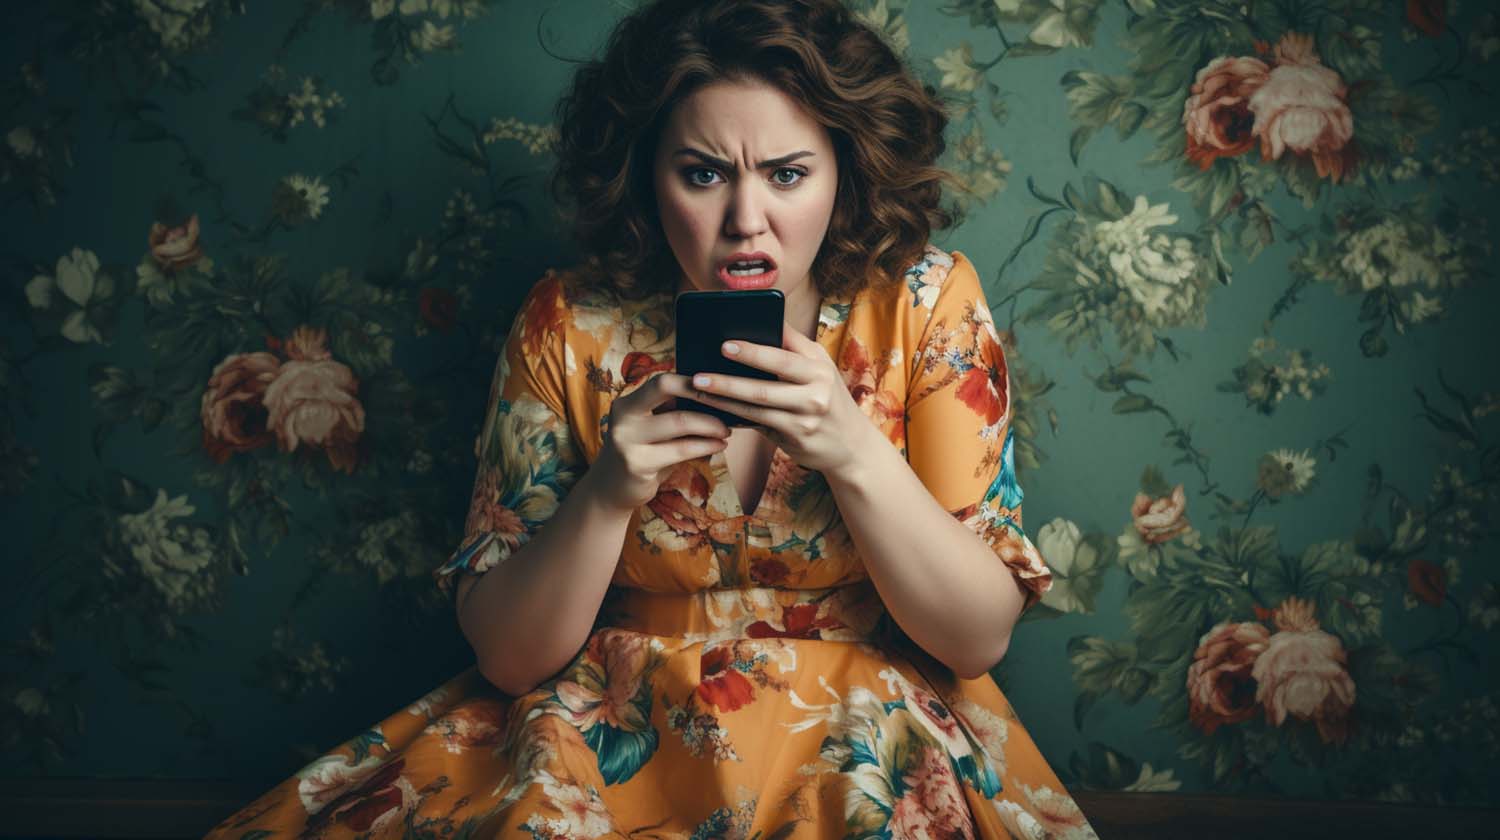 A Woman In A Floral Dress Is Looking At Her Phone, Experiencing Funny Autocorrect Fails.